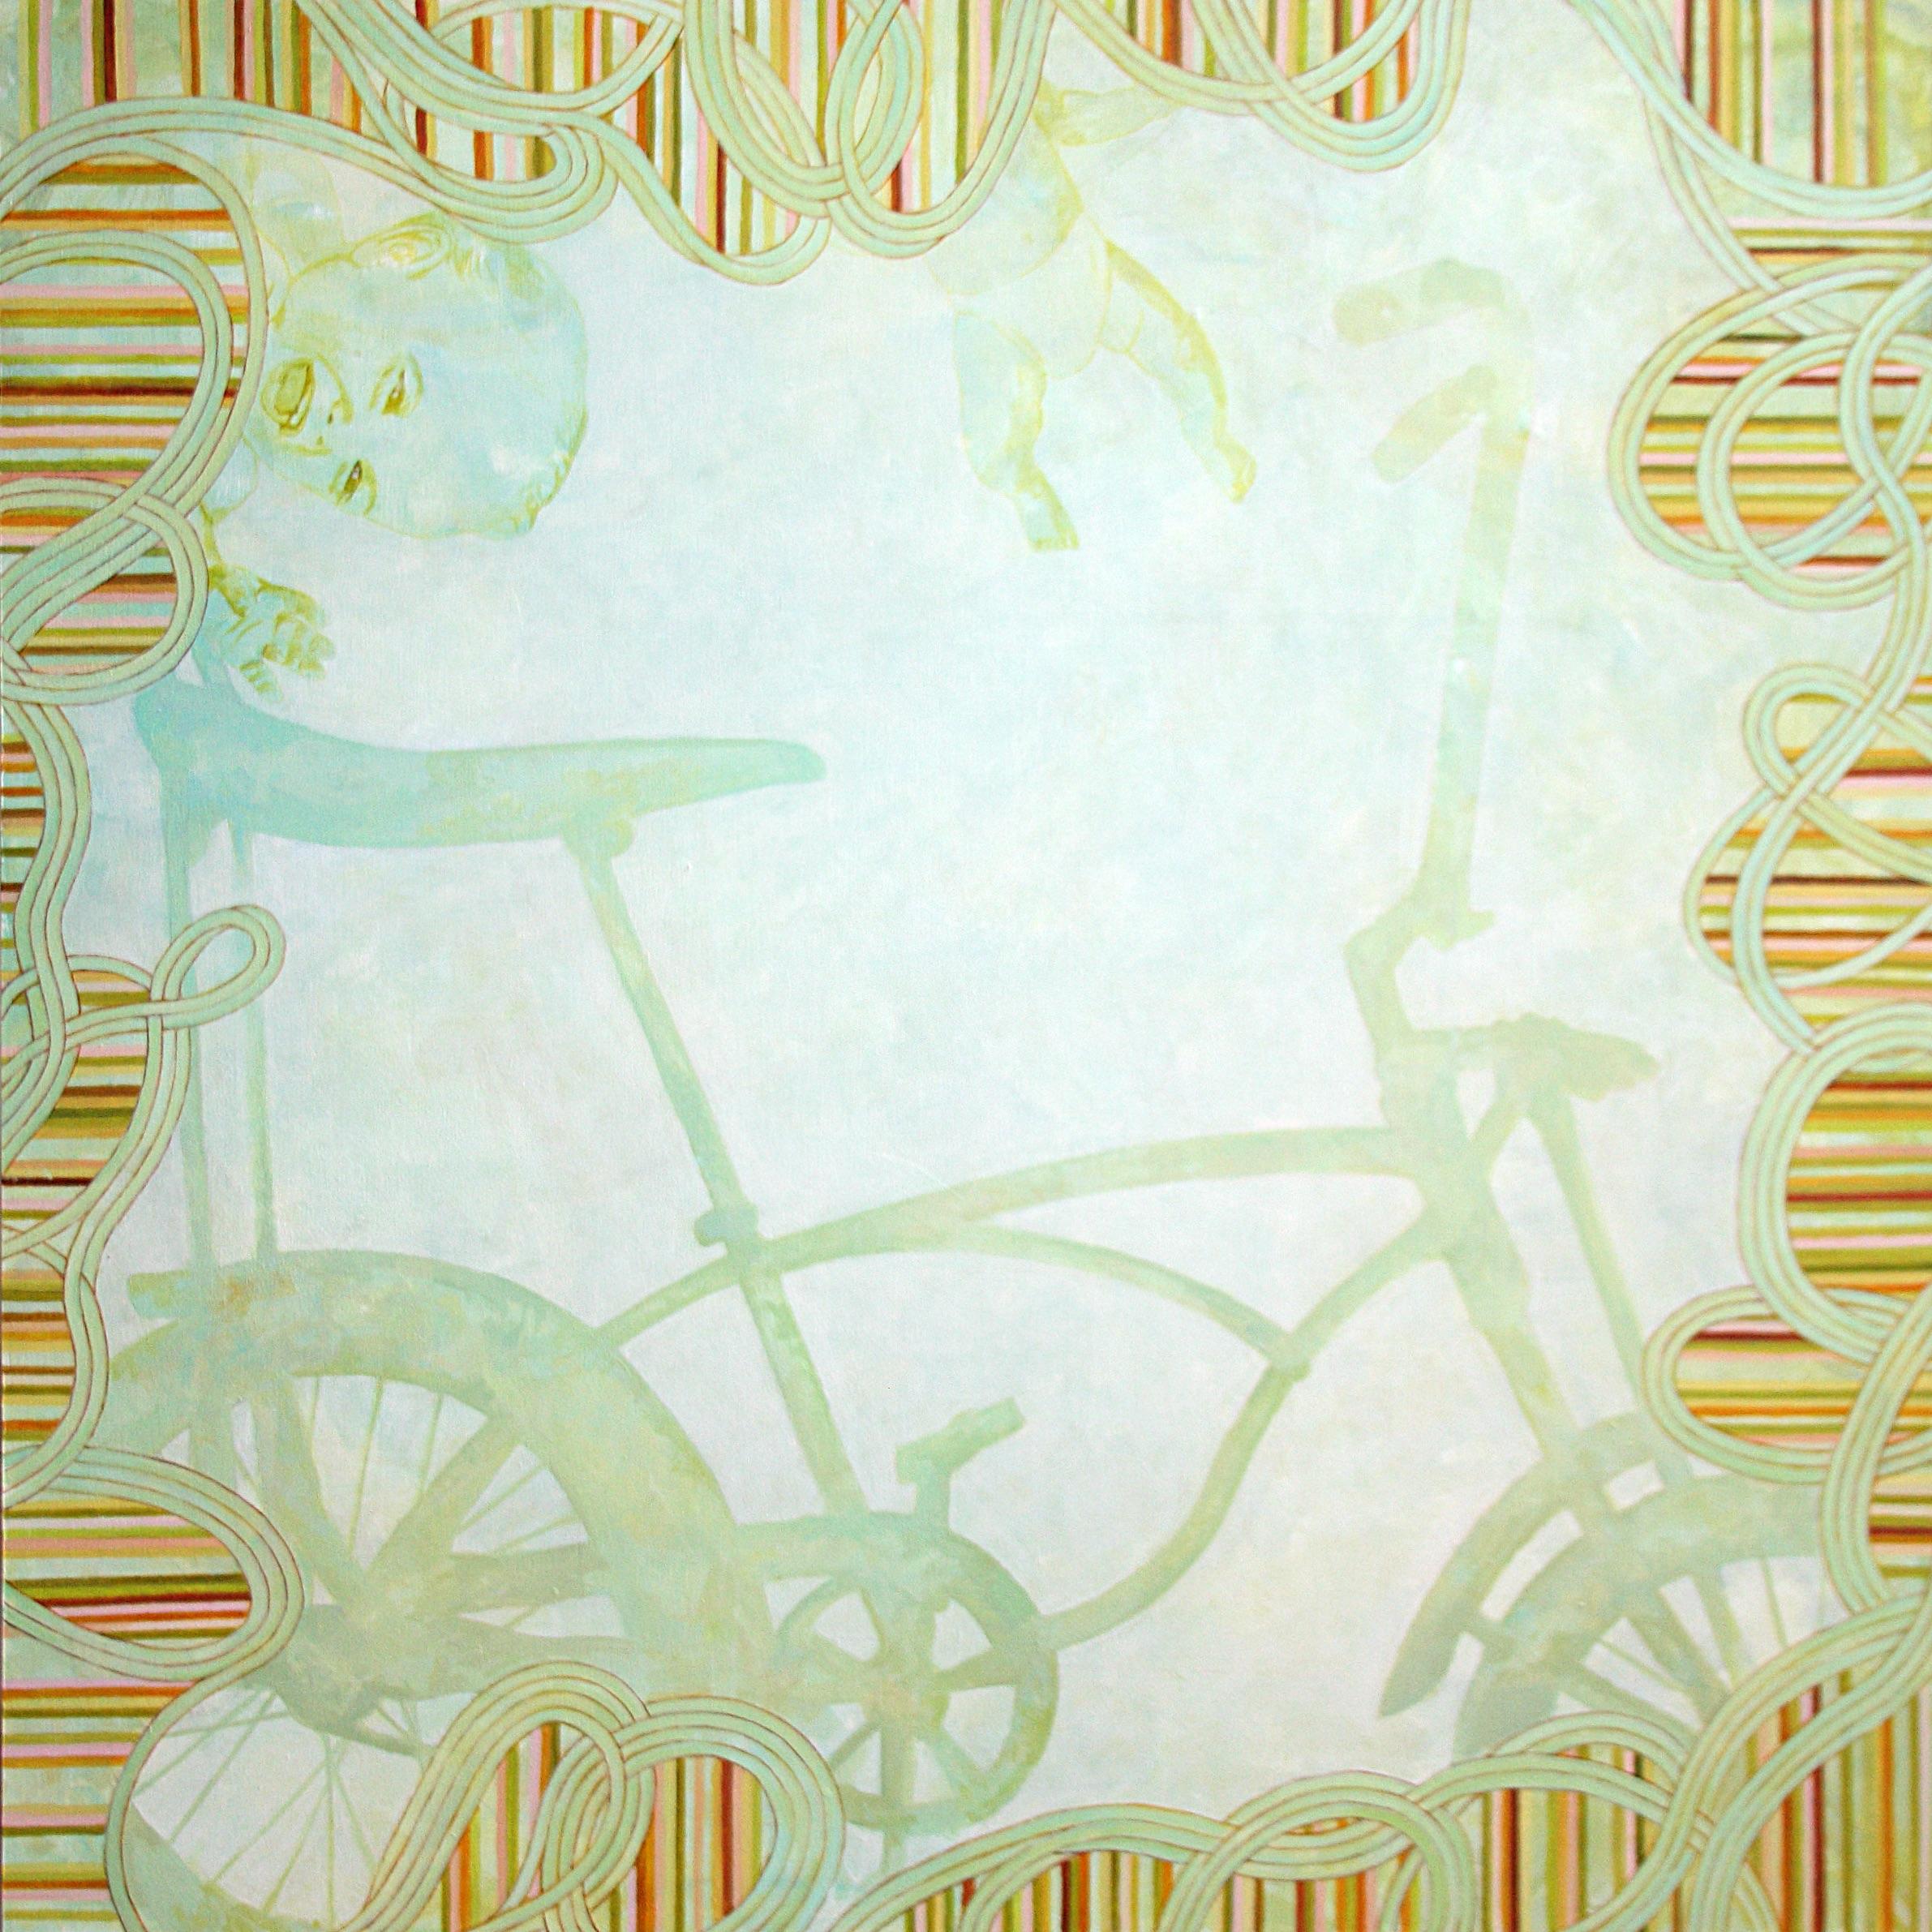 "Babies ate my Dingo", contemporary, cycle, green, pink, blue, acrylic painting - Painting by Sandra Cohen